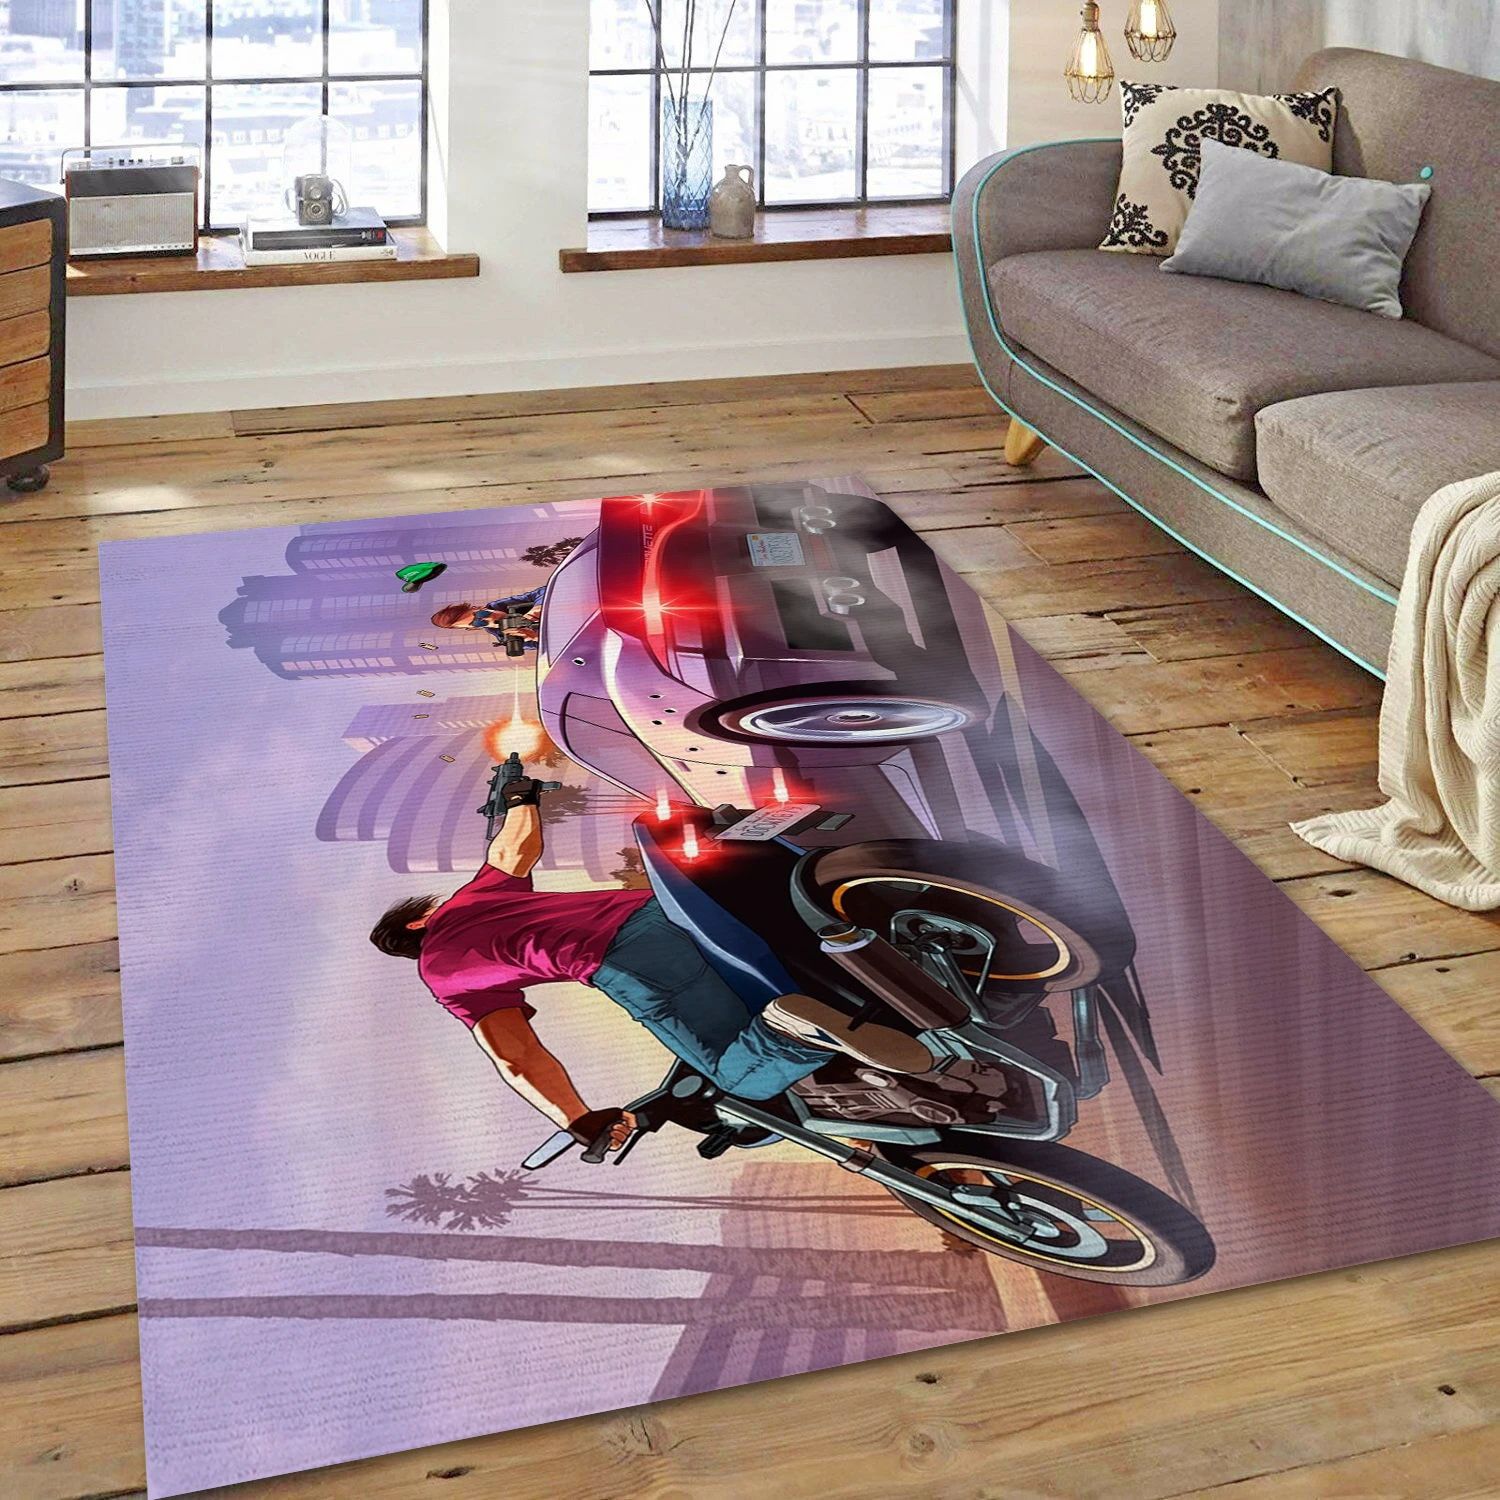 Grand Theft Auto V Video Game Reangle Rug, Area Rug - Home Decor Floor Decor - Indoor Outdoor Rugs